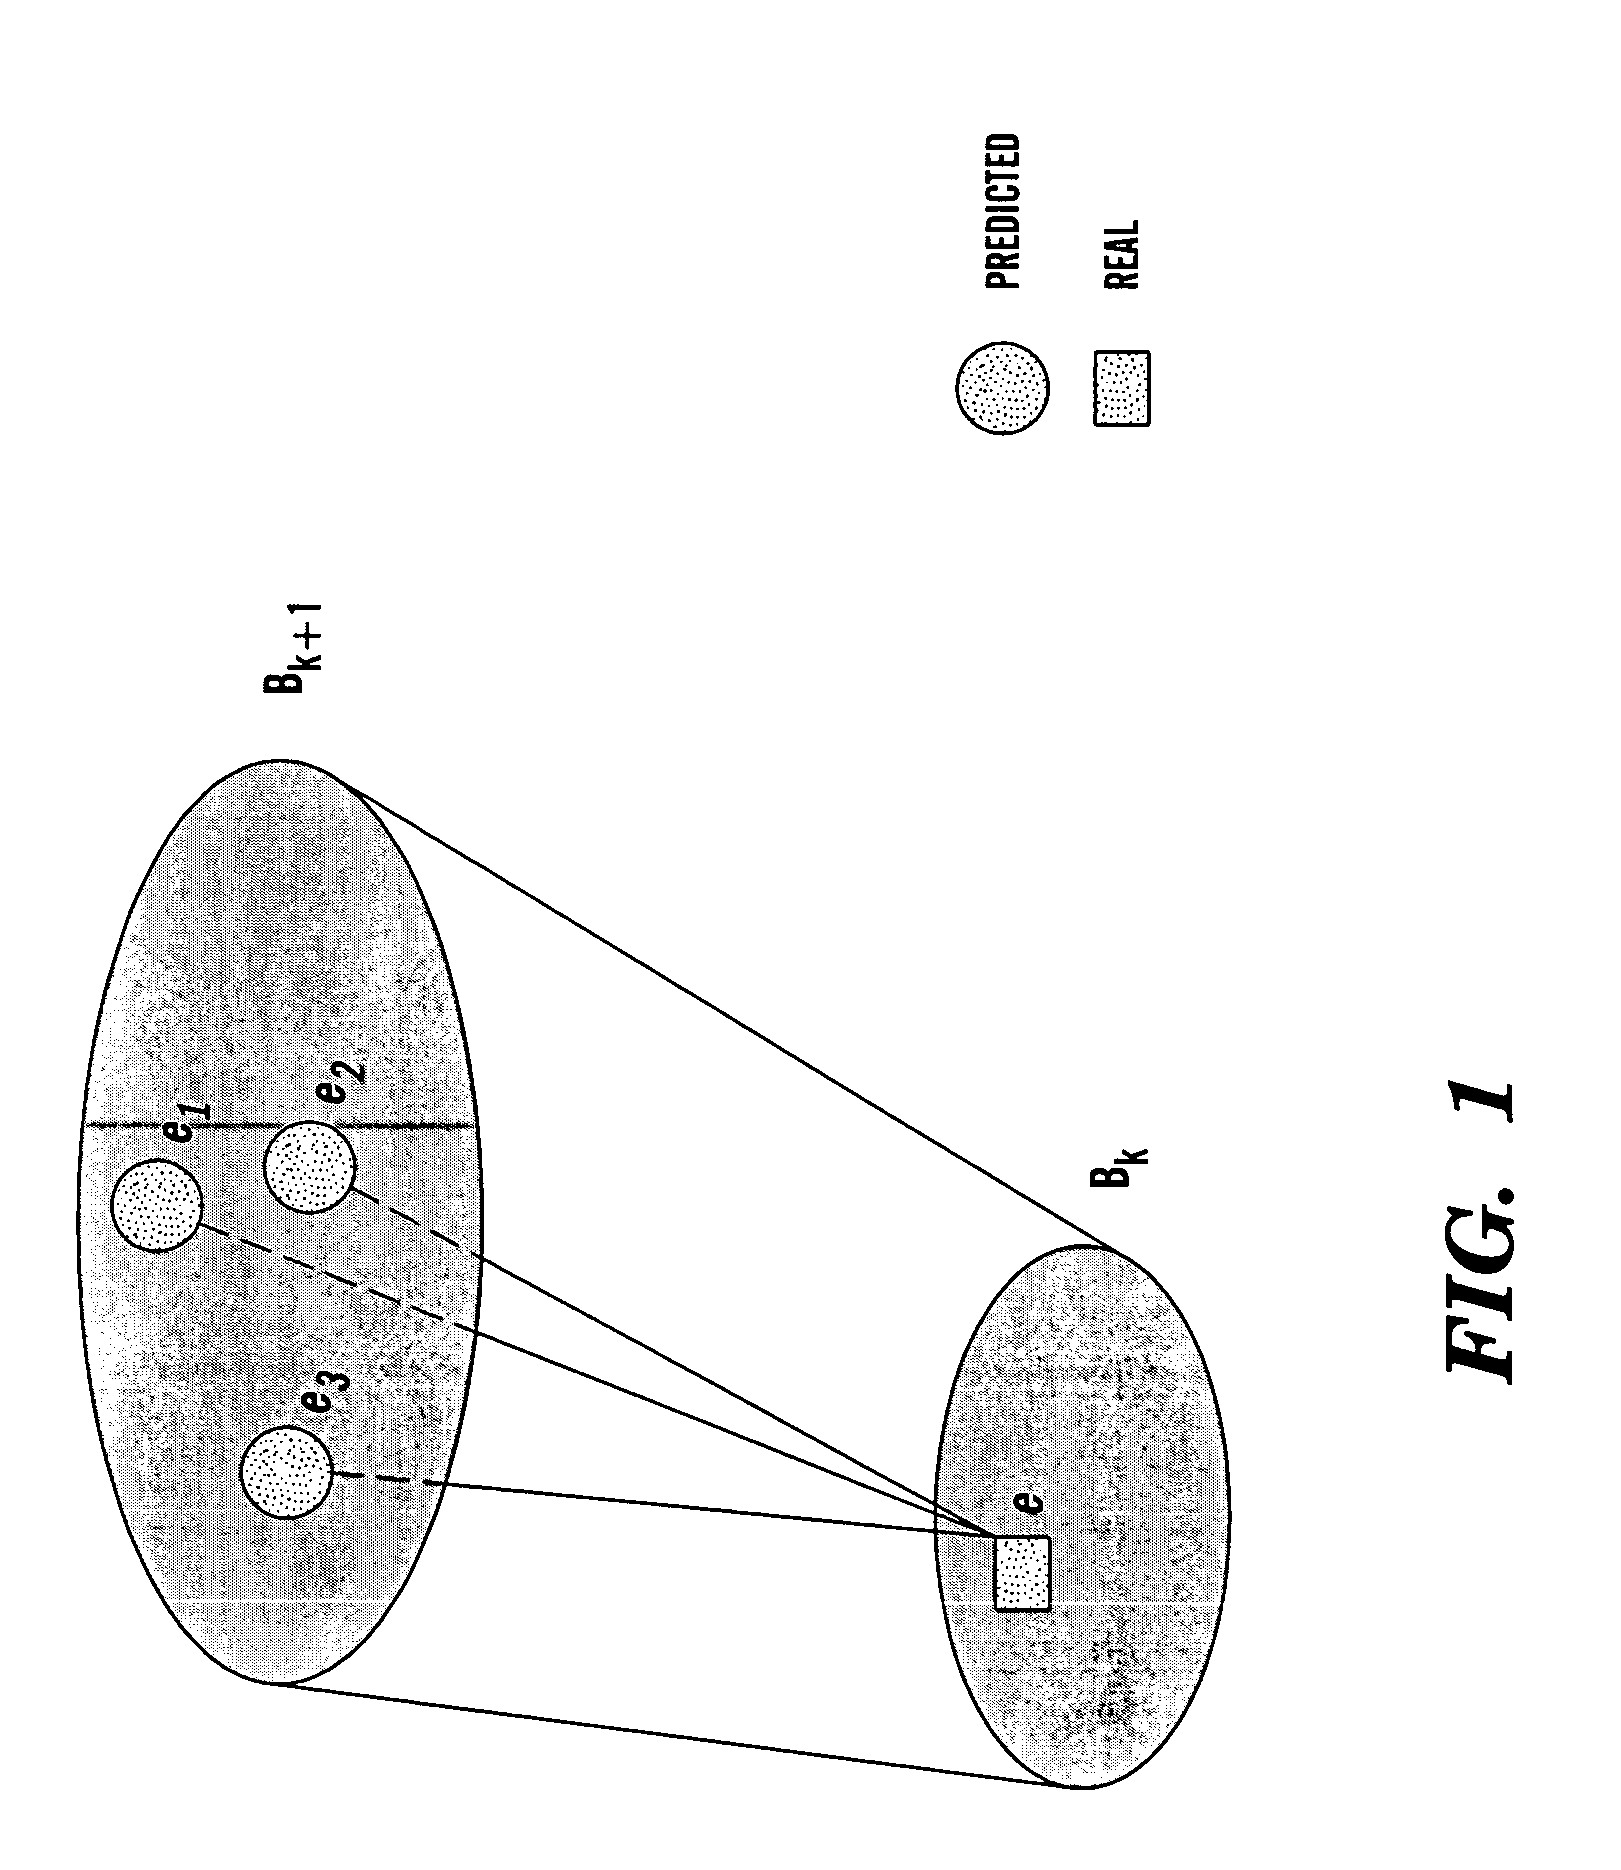 Method and system for associating events